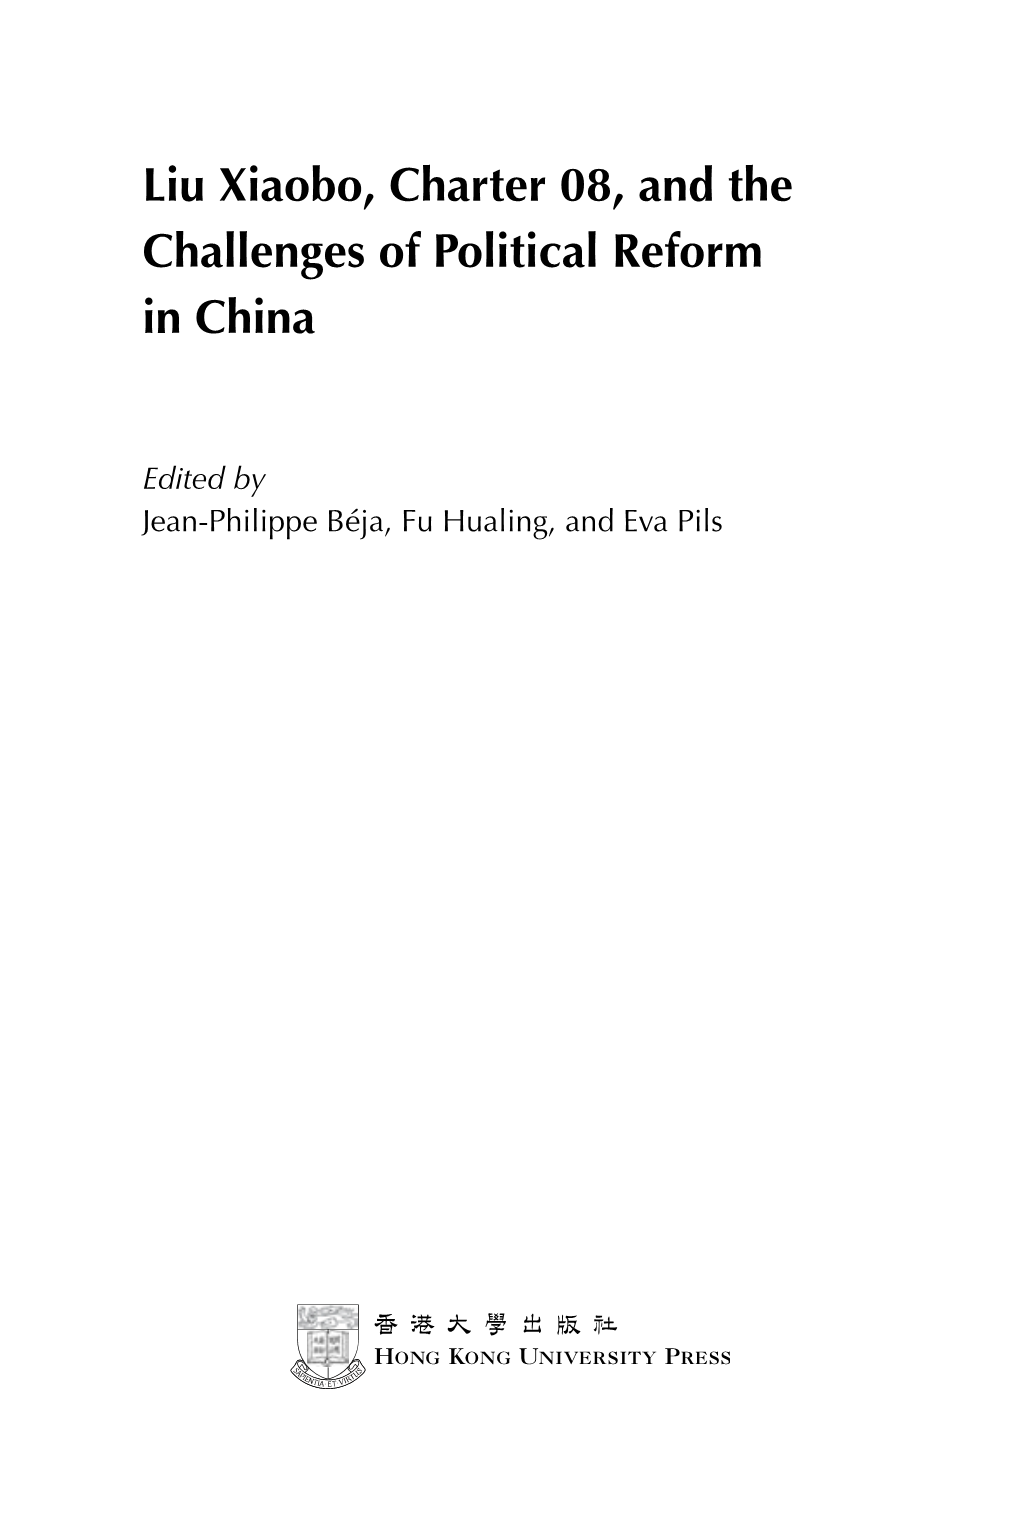 Liu Xiaobo, Charter 08, and the Challenges of Political Reform in China